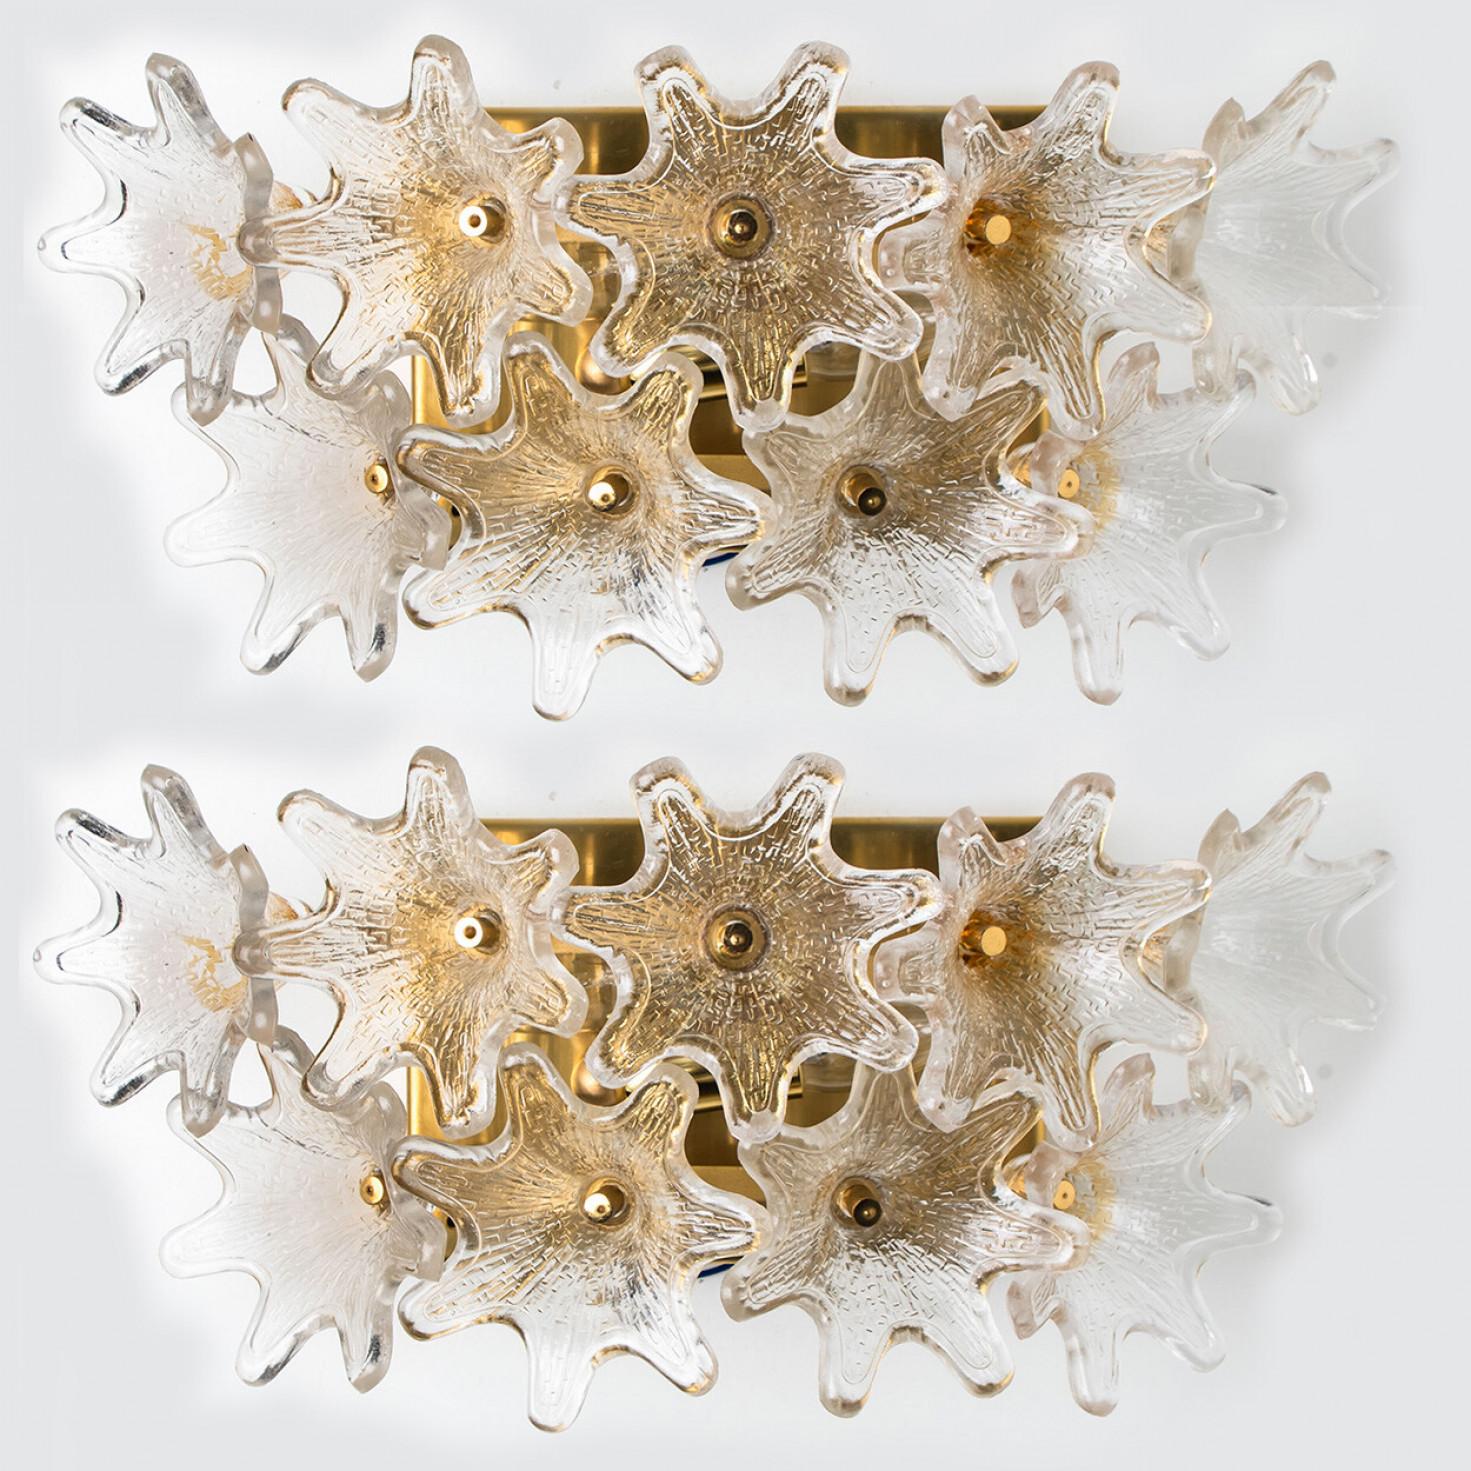 One of the three pairs of light fixtures by Paolo Venini for VeArt, Italy, 1960s. Brass hardware. Several star shaped clear resembles flowers. The fixture illuminates beautifully on wall.

Exceptional pieces and in this quantity extreme rare to